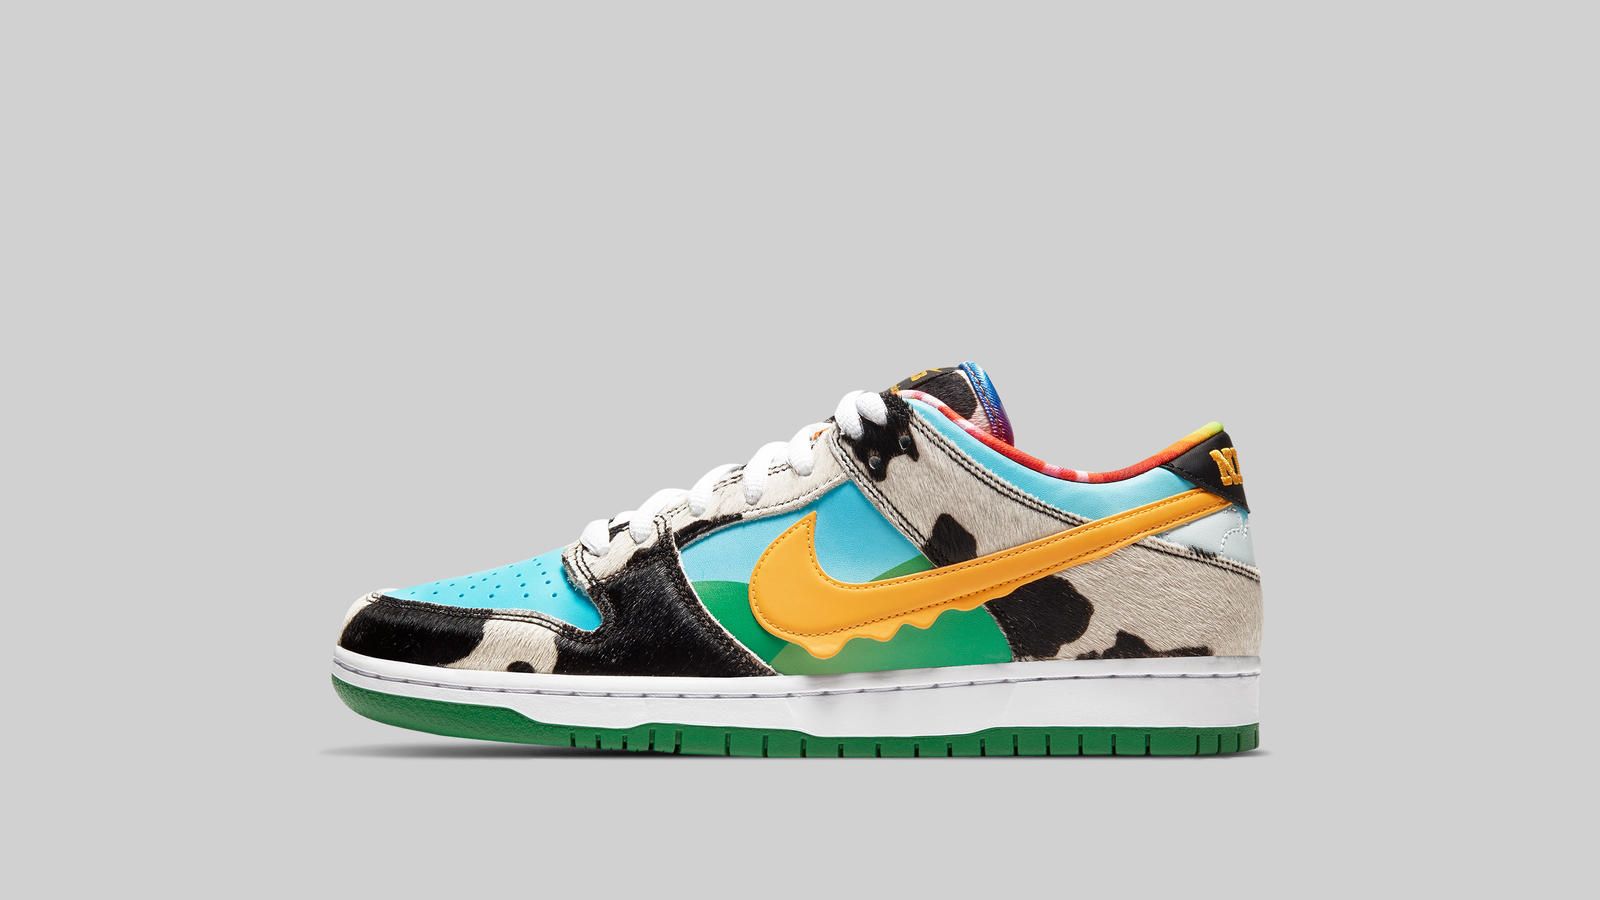 Nike Dunk Low Pro Ben & Jerry's Official Image and Release Date